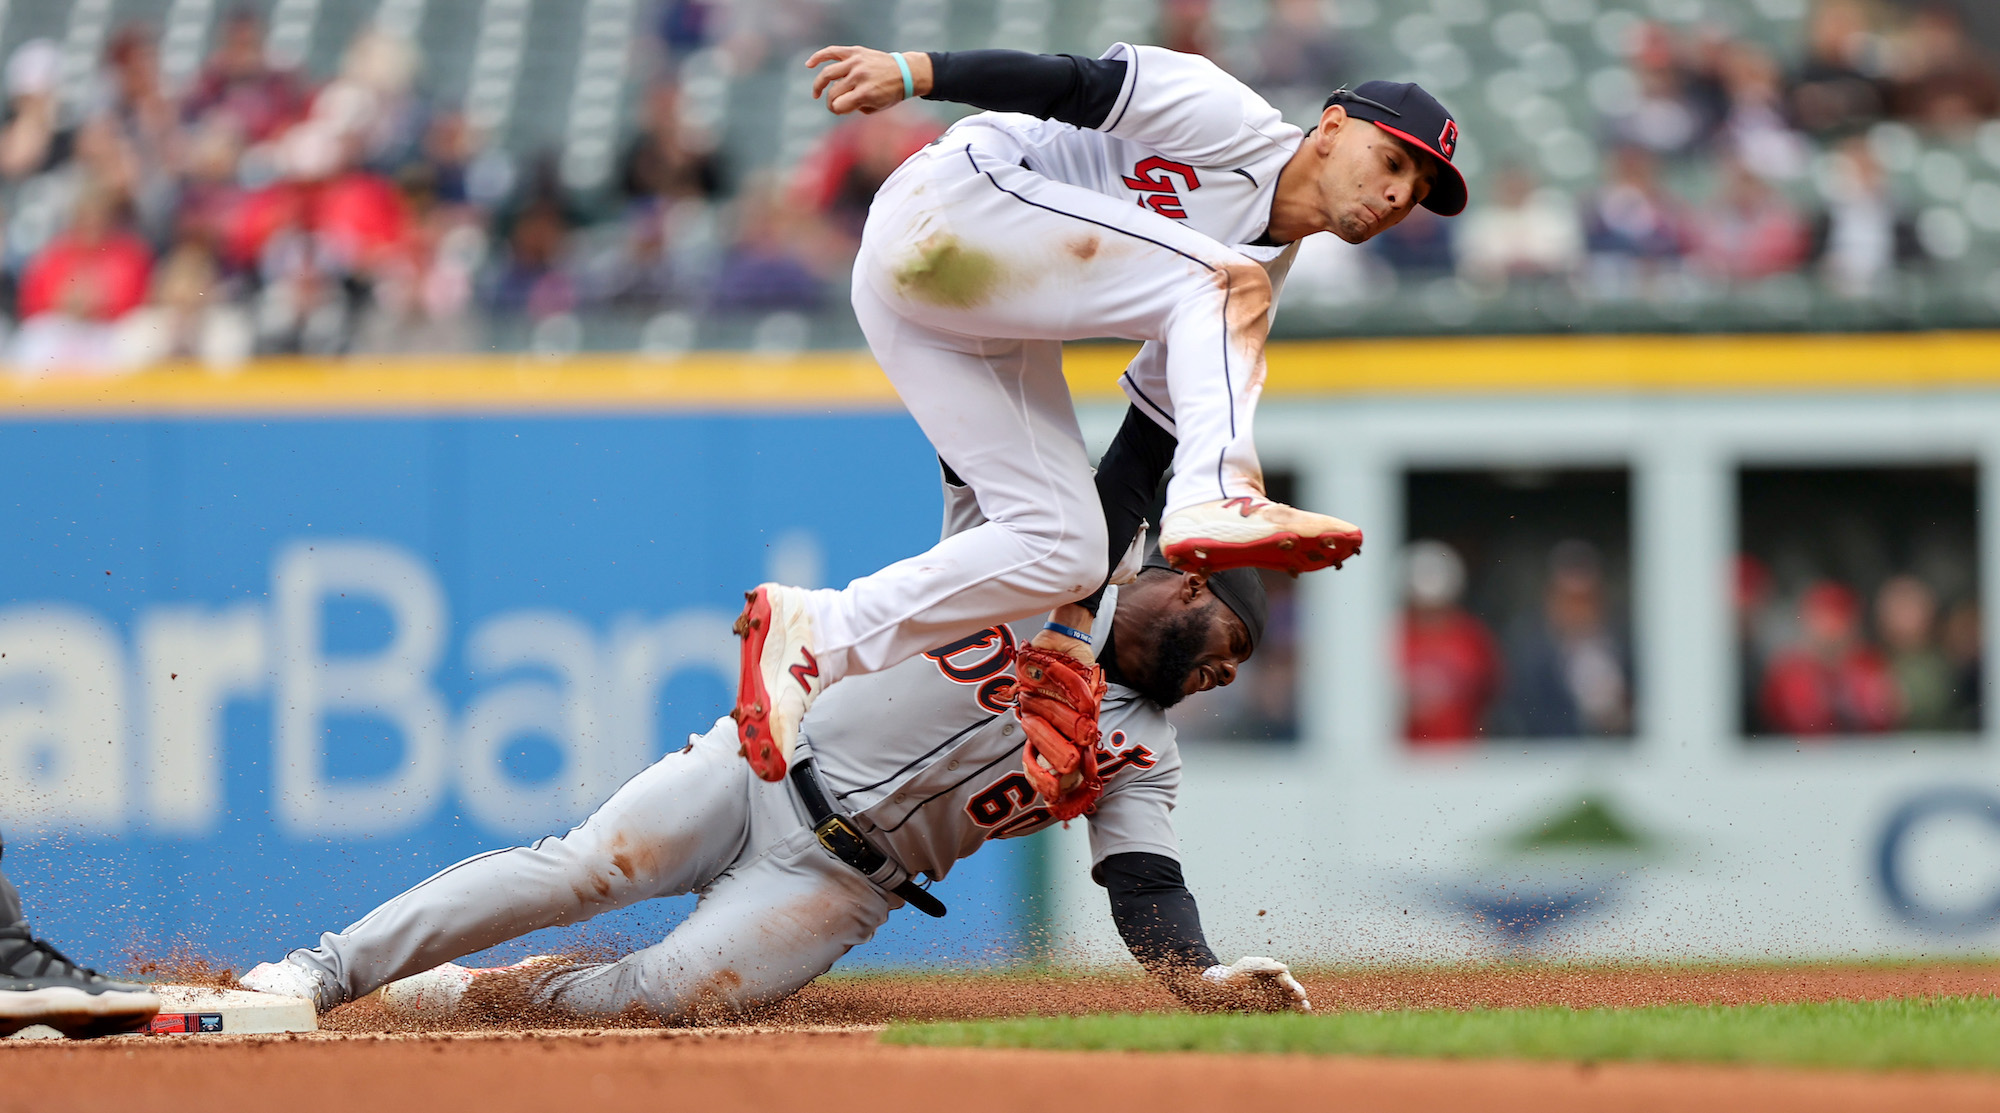 CLEVELAND, OH - MAY 08: Cleveland Guardians second baseman Andres Gimenez (0) tags out Detroit Tigers left fielder Akil Baddoo (60) attempting to steal second base during the second inning of the Major League Baseball game between the Detroit Tigers and Cleveland Guardians on May 8, 2023, at Progressive Field in Cleveland, OH. (Photo by Frank Jansky/Icon Sportswire via Getty Images)